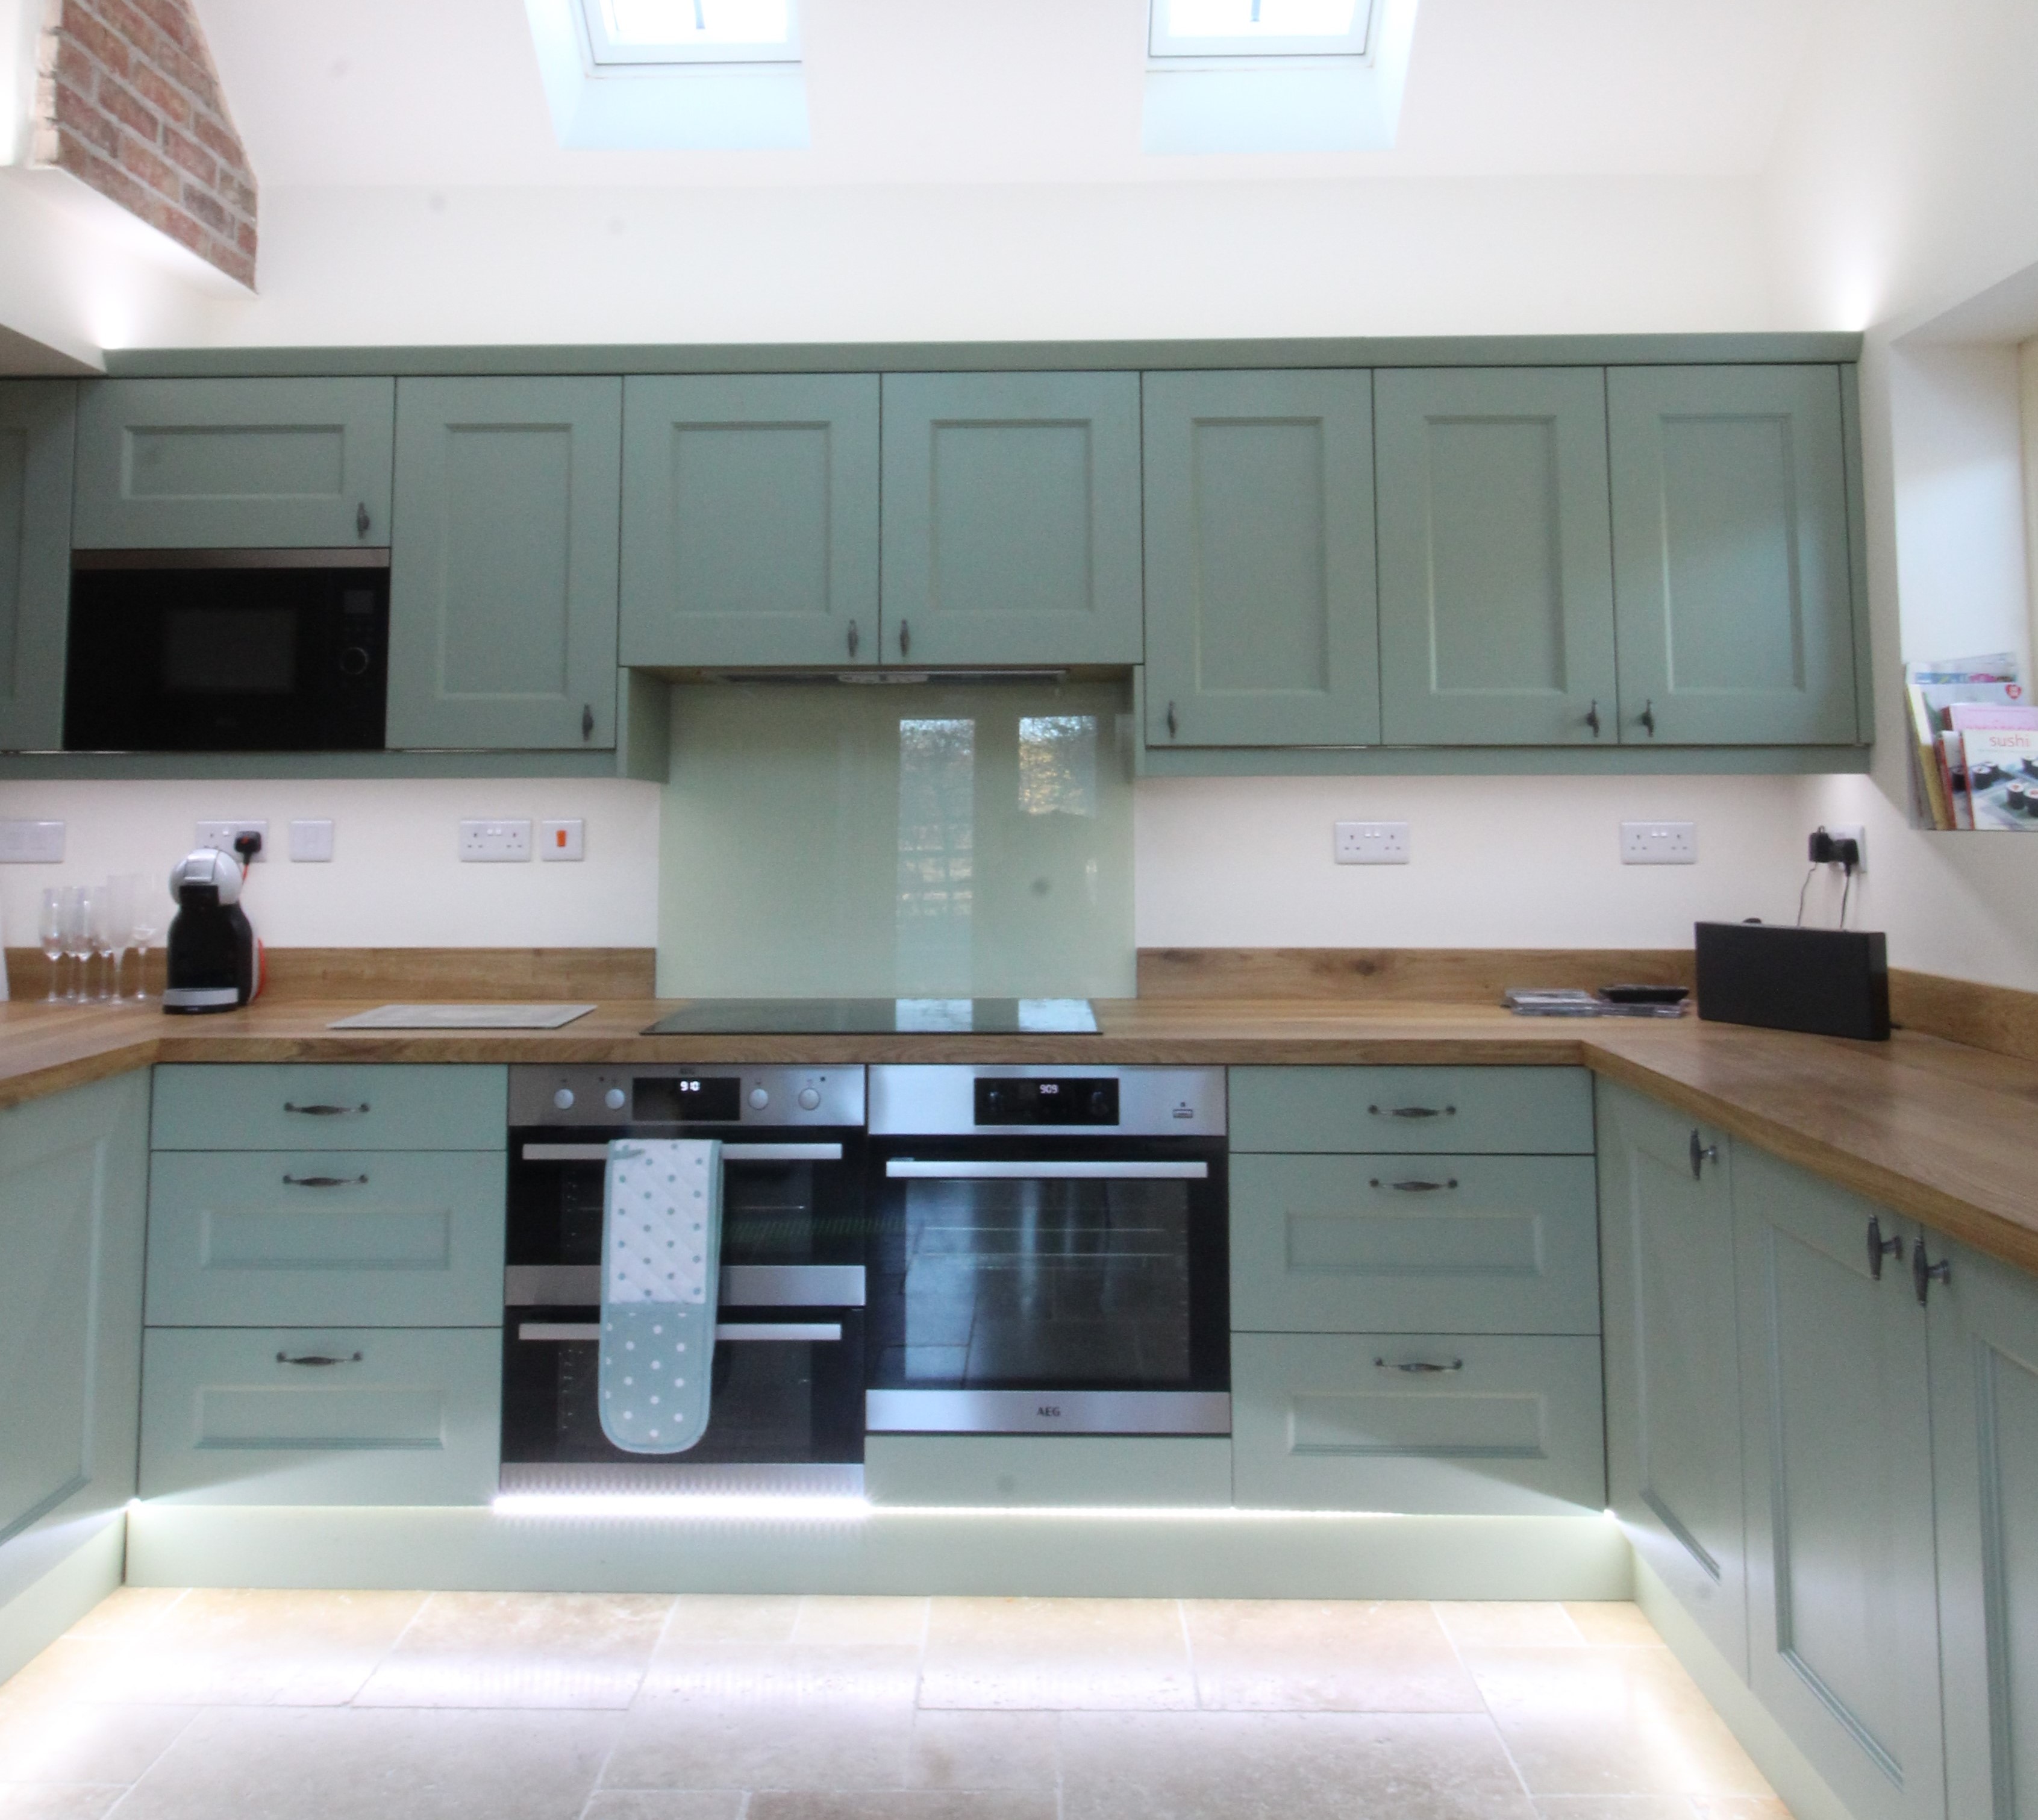 A coastal green alongside lovely oak worktops which gives this kitchen a very welcoming feel.